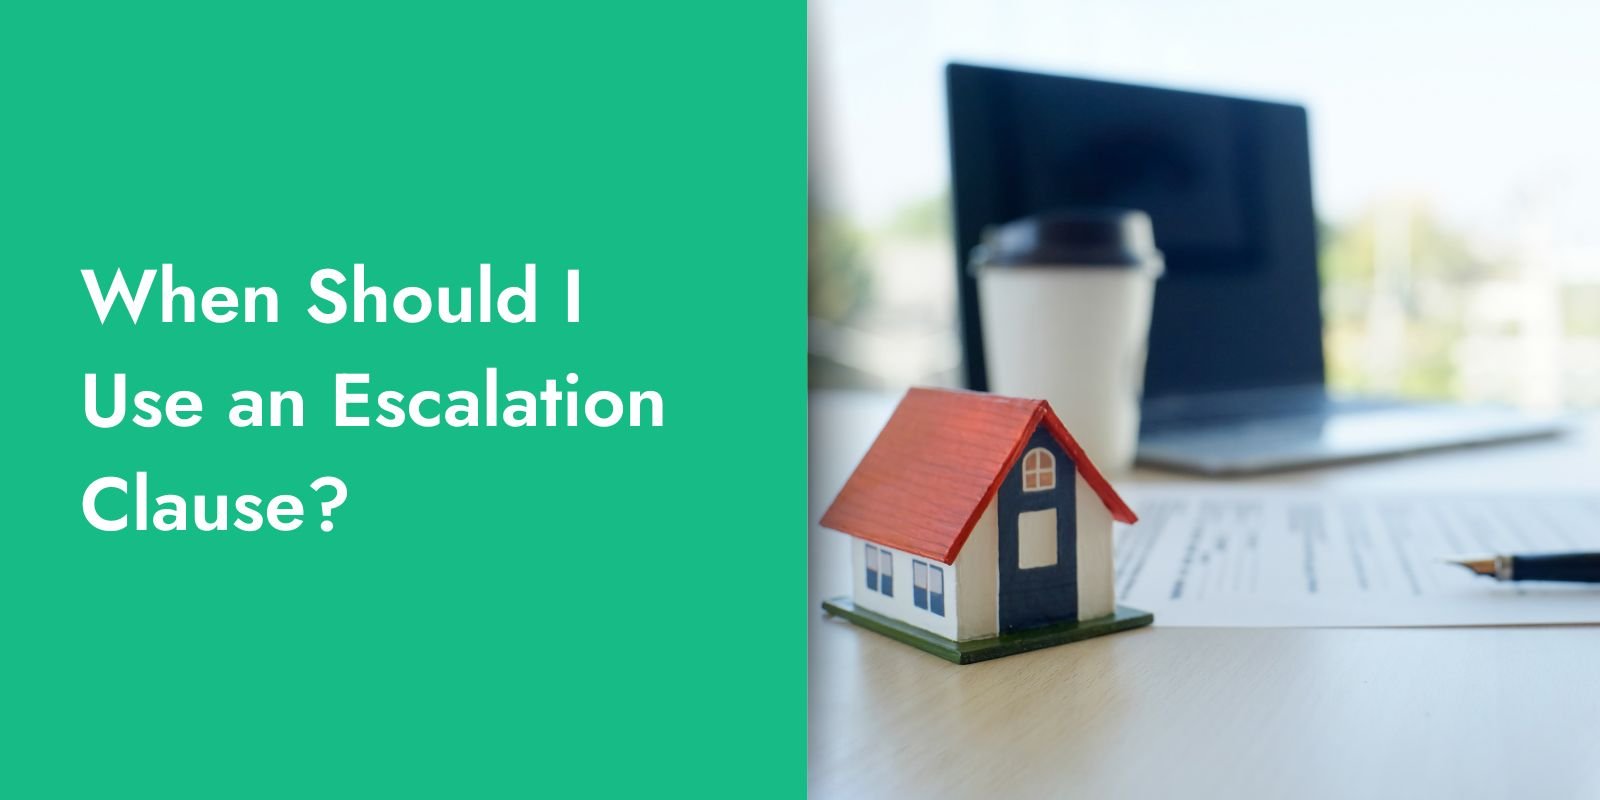 When to Use an Escalation Clause